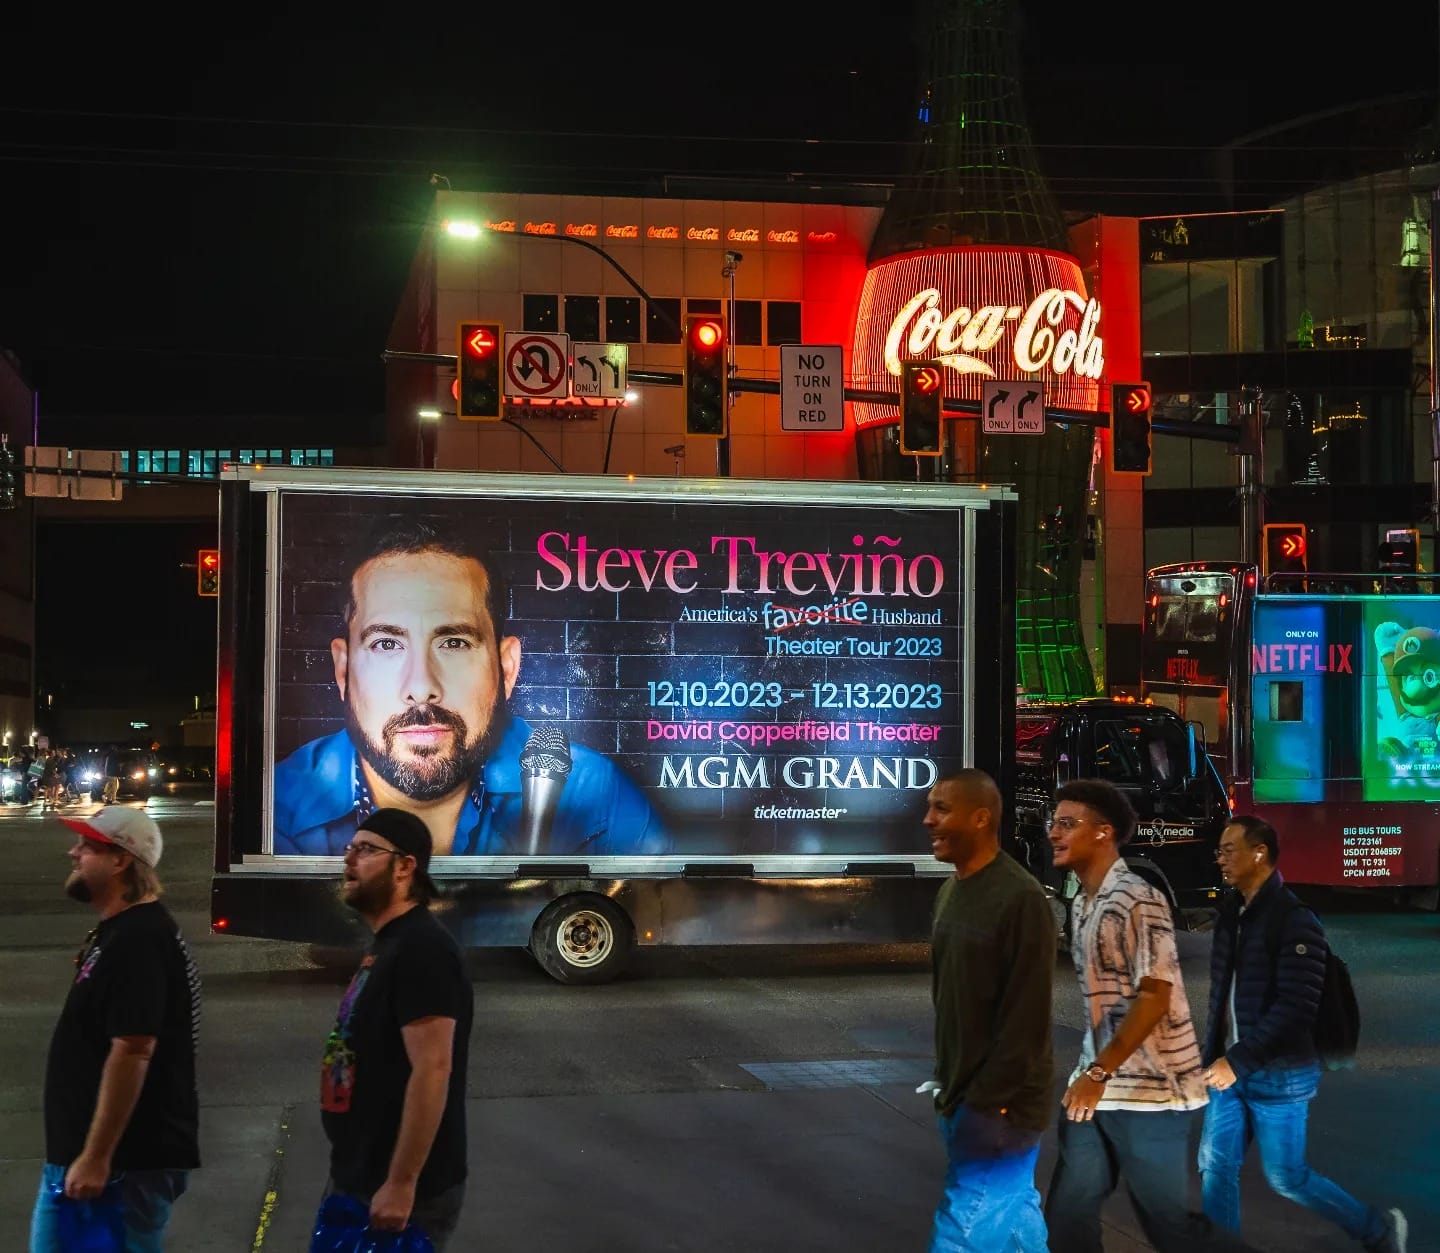 Steve Trevino Brings Laughs to MGM Grand’s David Copperfield Theater